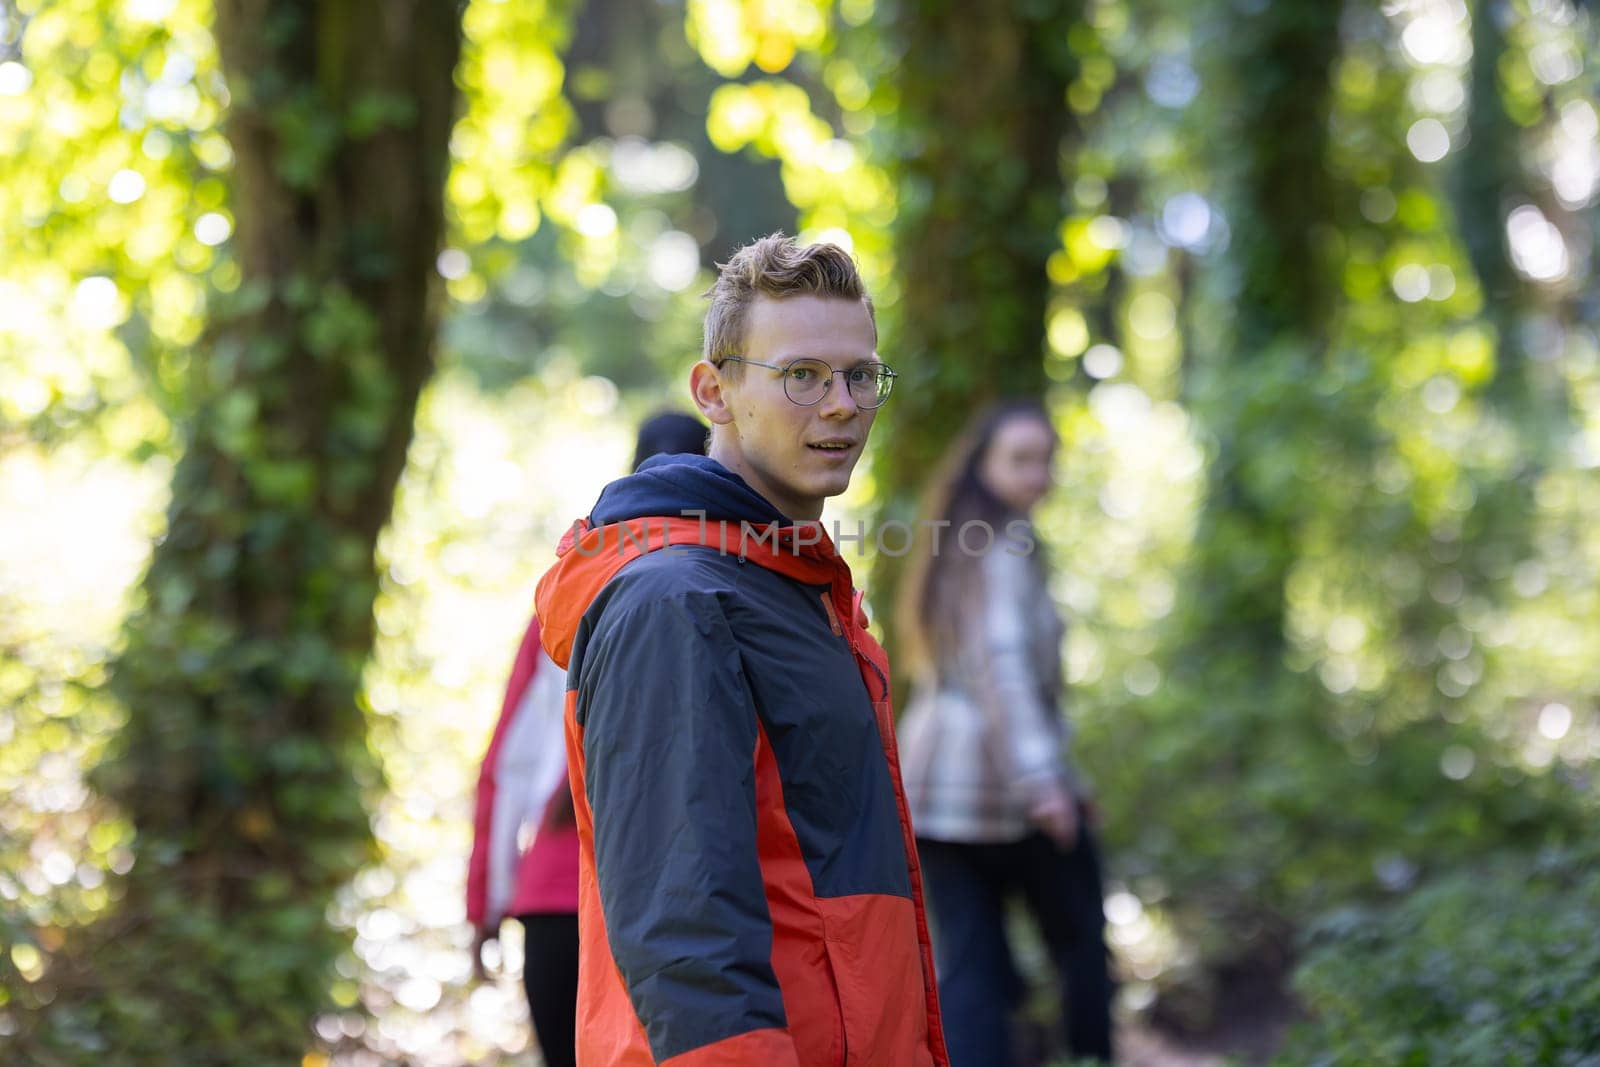 Man in Red and Black Jacket Walking Through Forest by Studia72